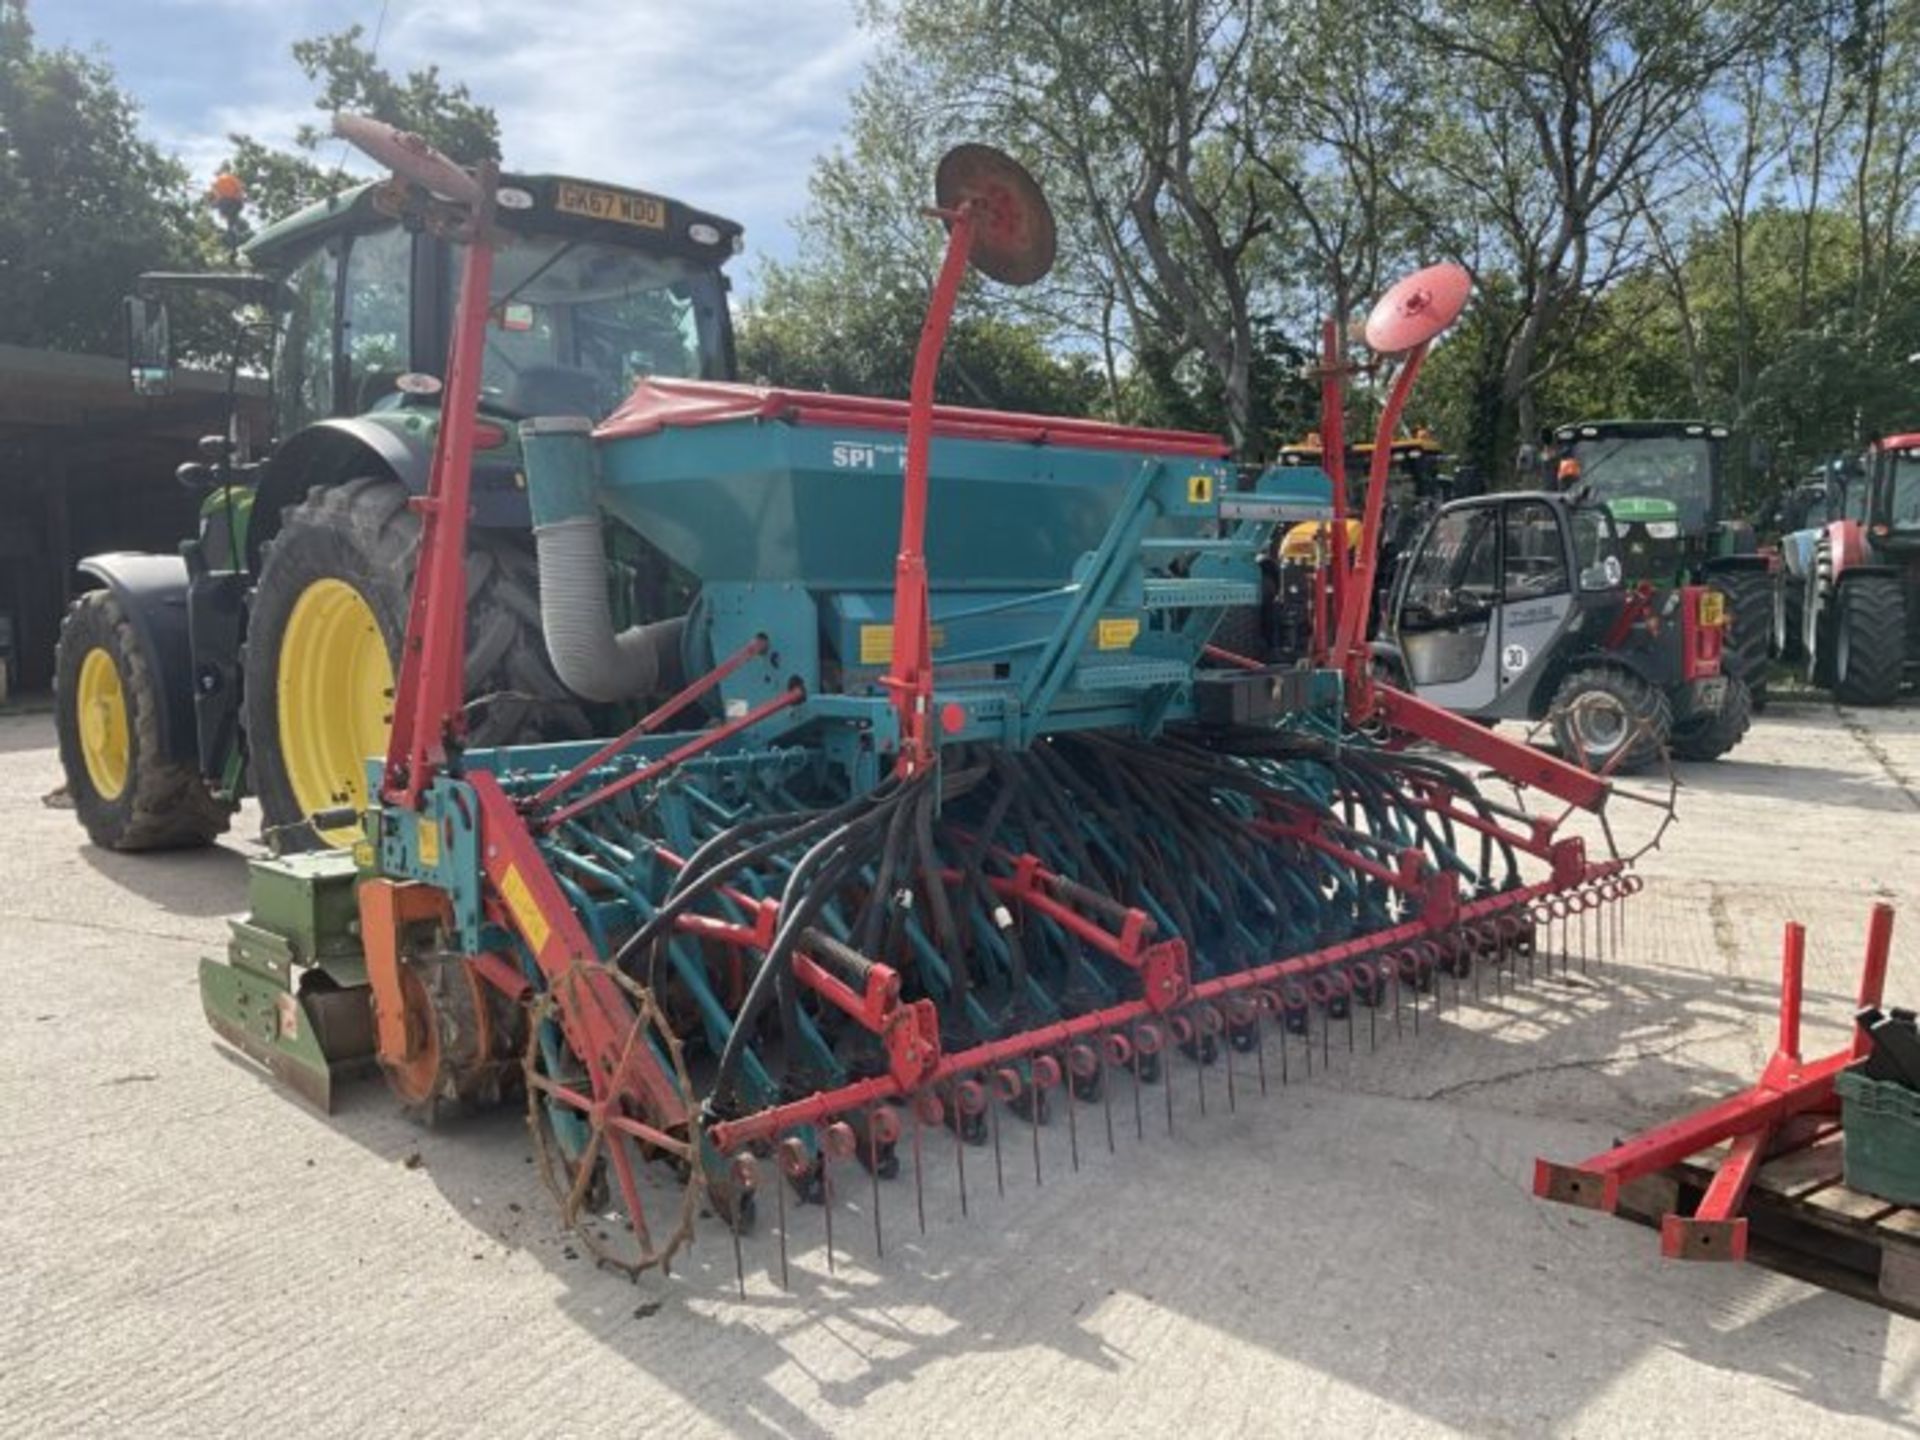 AMAZONE KG 4000 SPECIAL POWER HARROW YEAR 2011 WITH RECO SULKY SPI DRILL. YEAR 1997. - Image 2 of 7